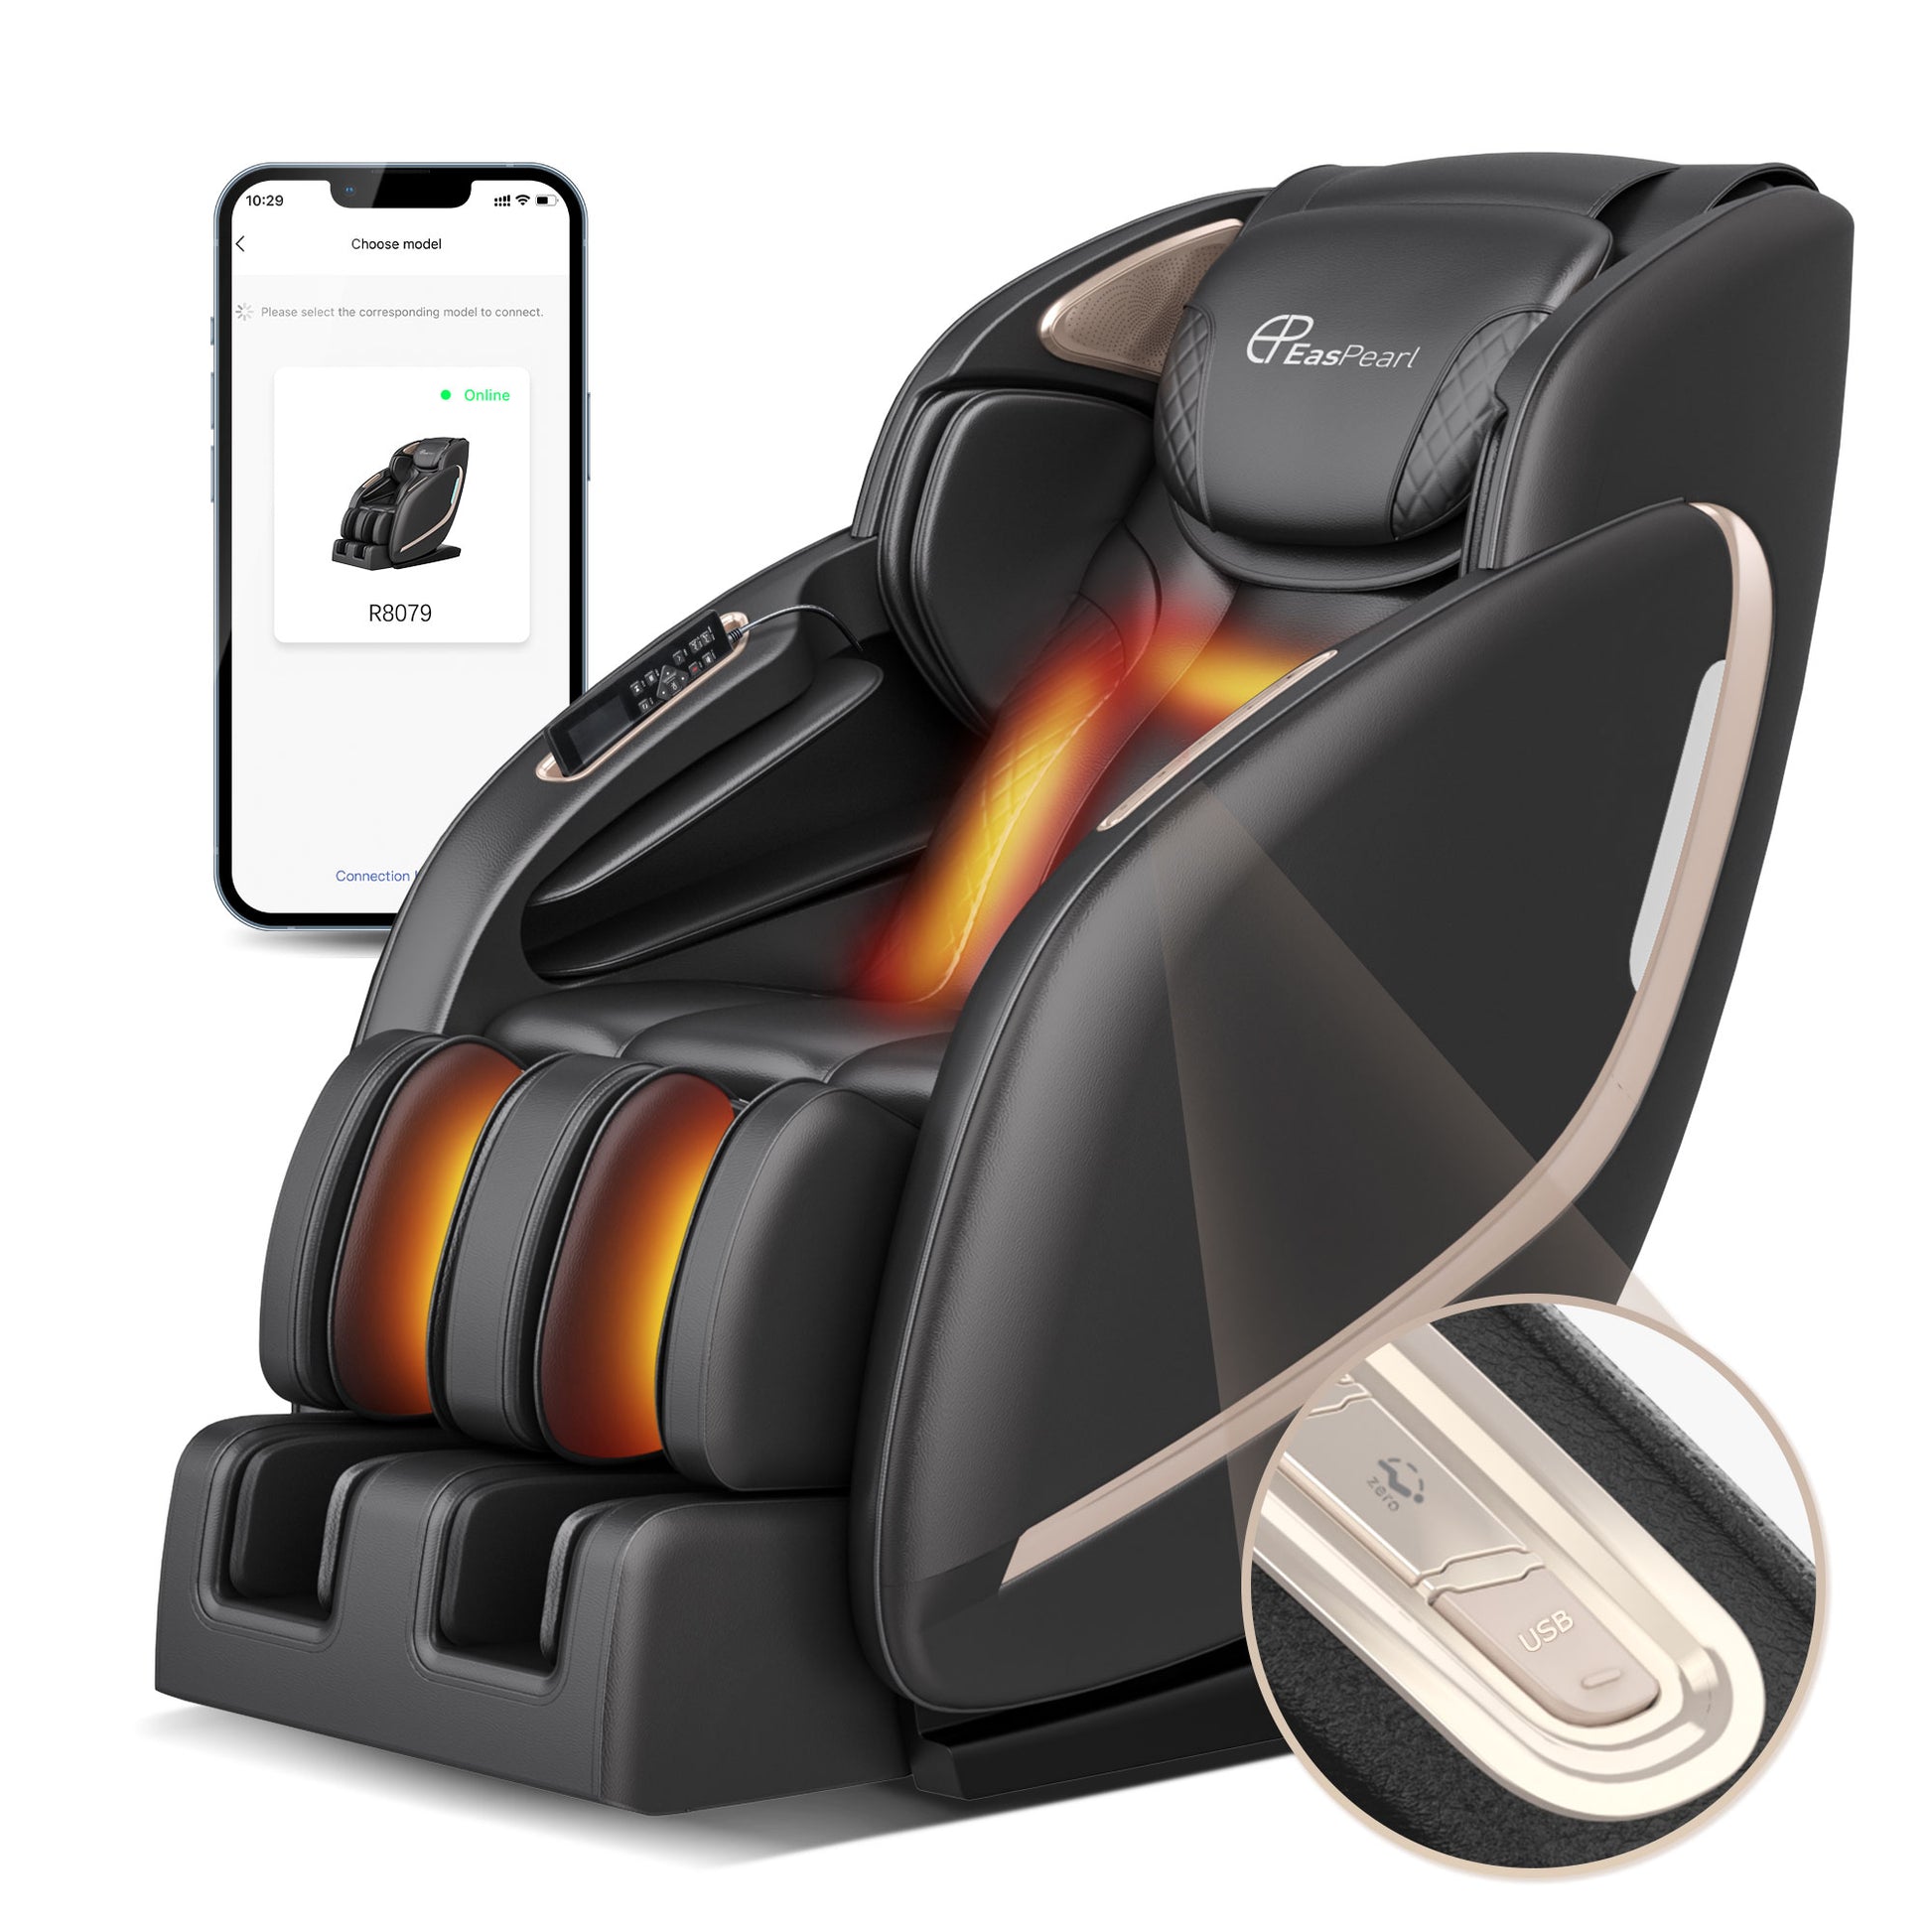 Easpearl R8079 Massage Chair APP Control and USB Spot